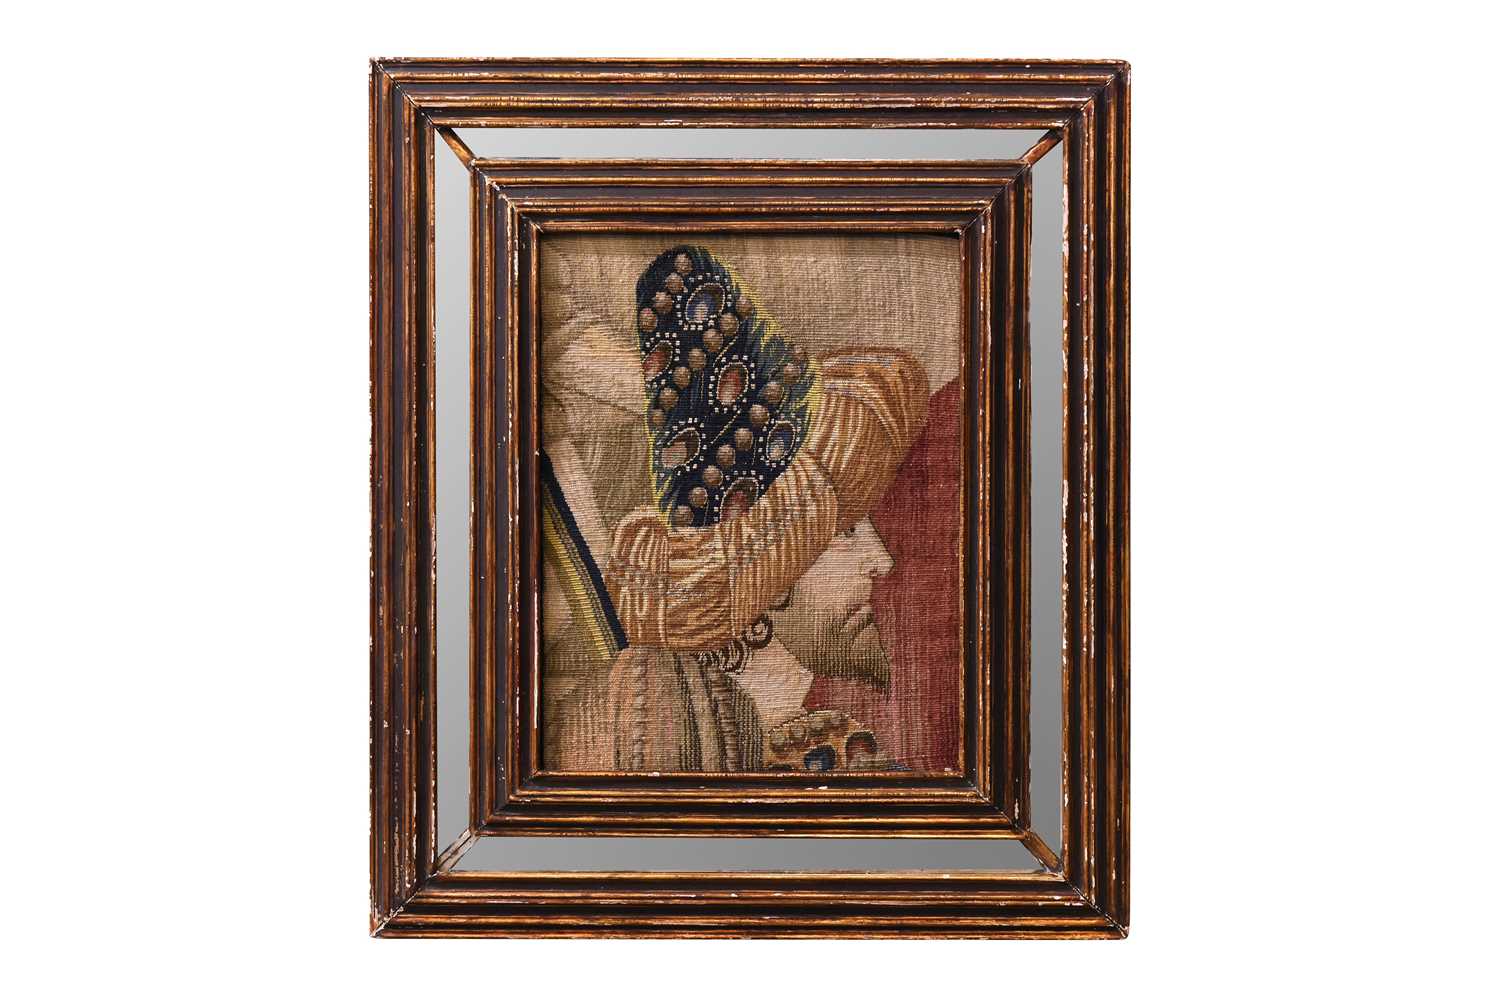 Lot 271 - AN AUBUSSON-STYLE FIGURAL TAPESTRY FRAGMENT WITH A TURK'S HEAD